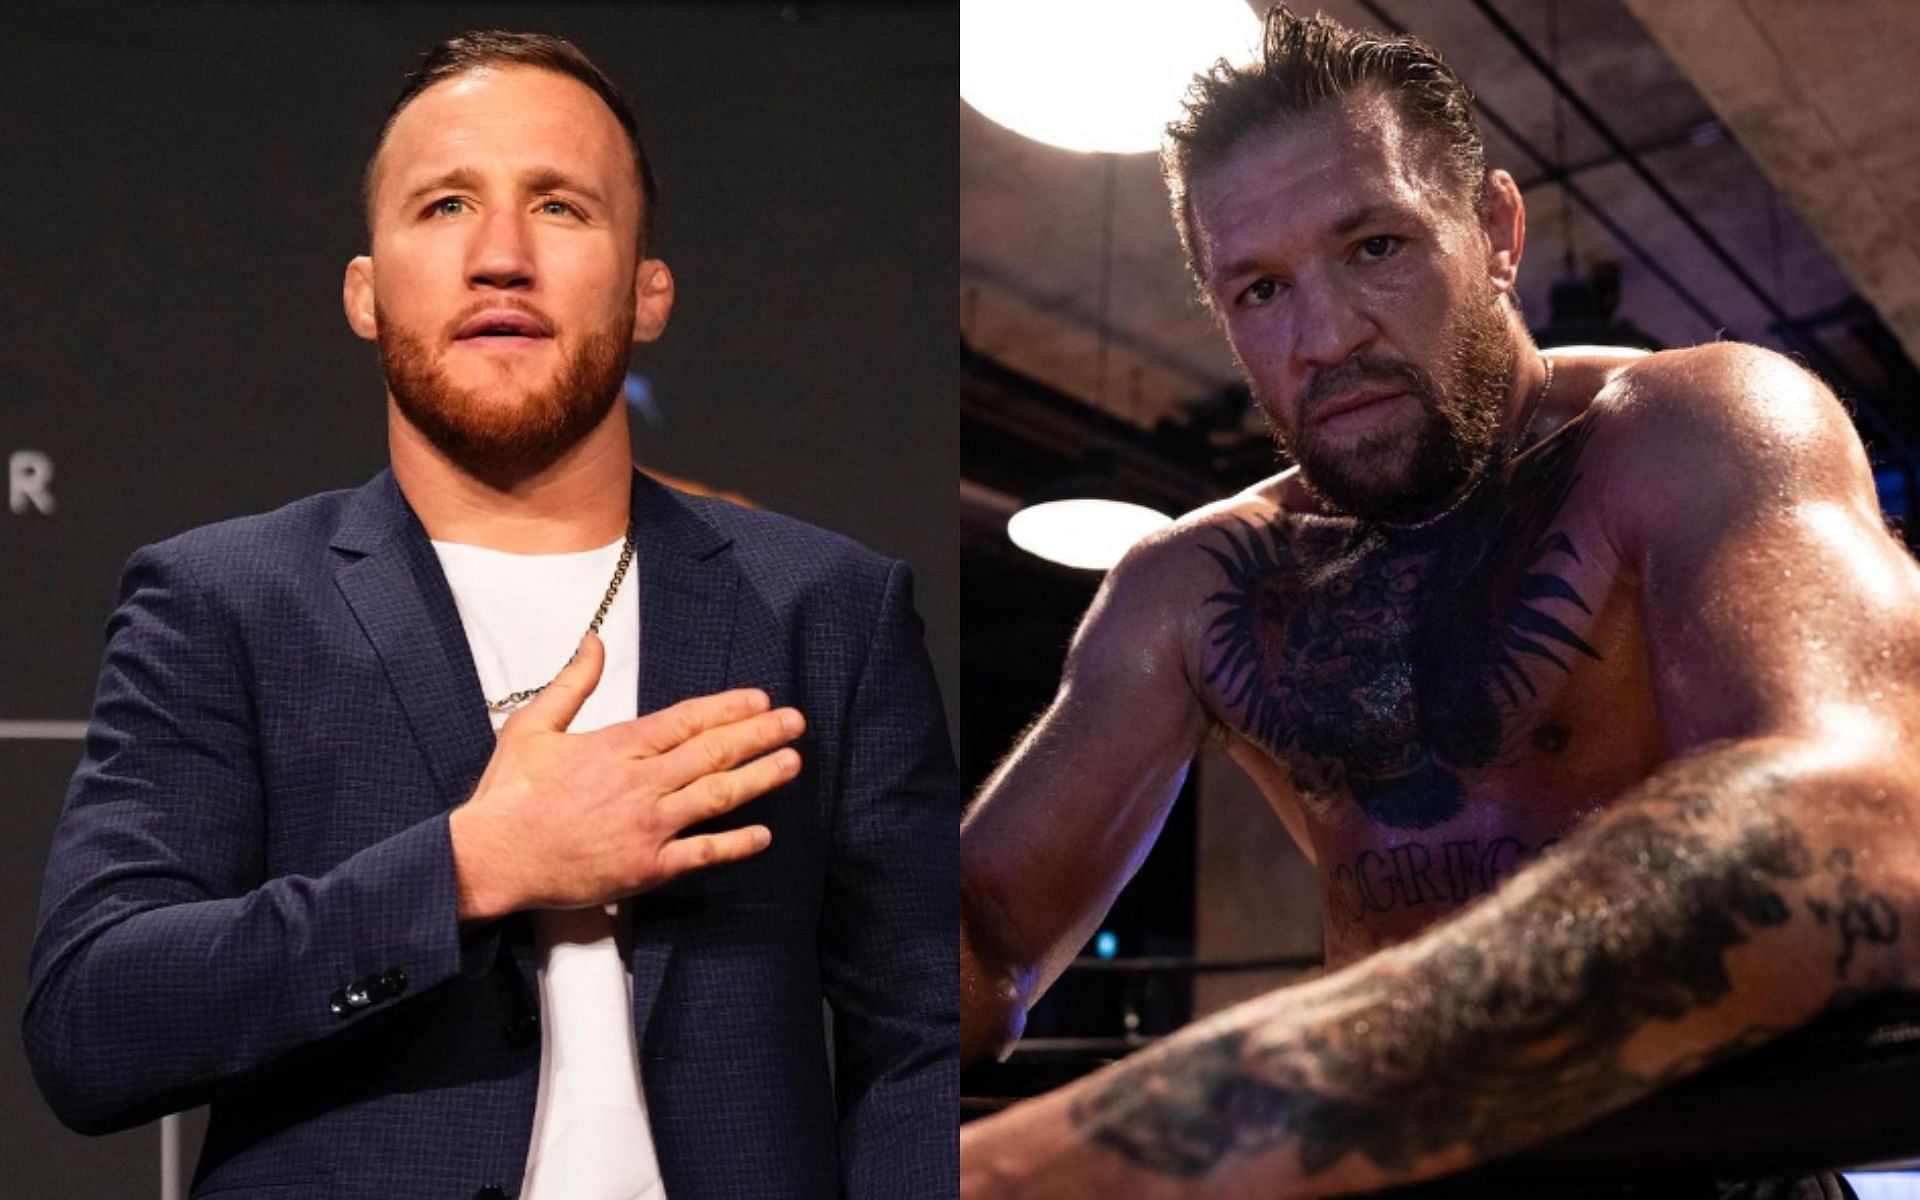 When Justin Gaethje (left) said Conor McGregor (right) would have to face him before a Khabib Nurmagomedov rematch [Images courtesy of @justin_gaethje &amp; @thenotoriousmma on Instagram]